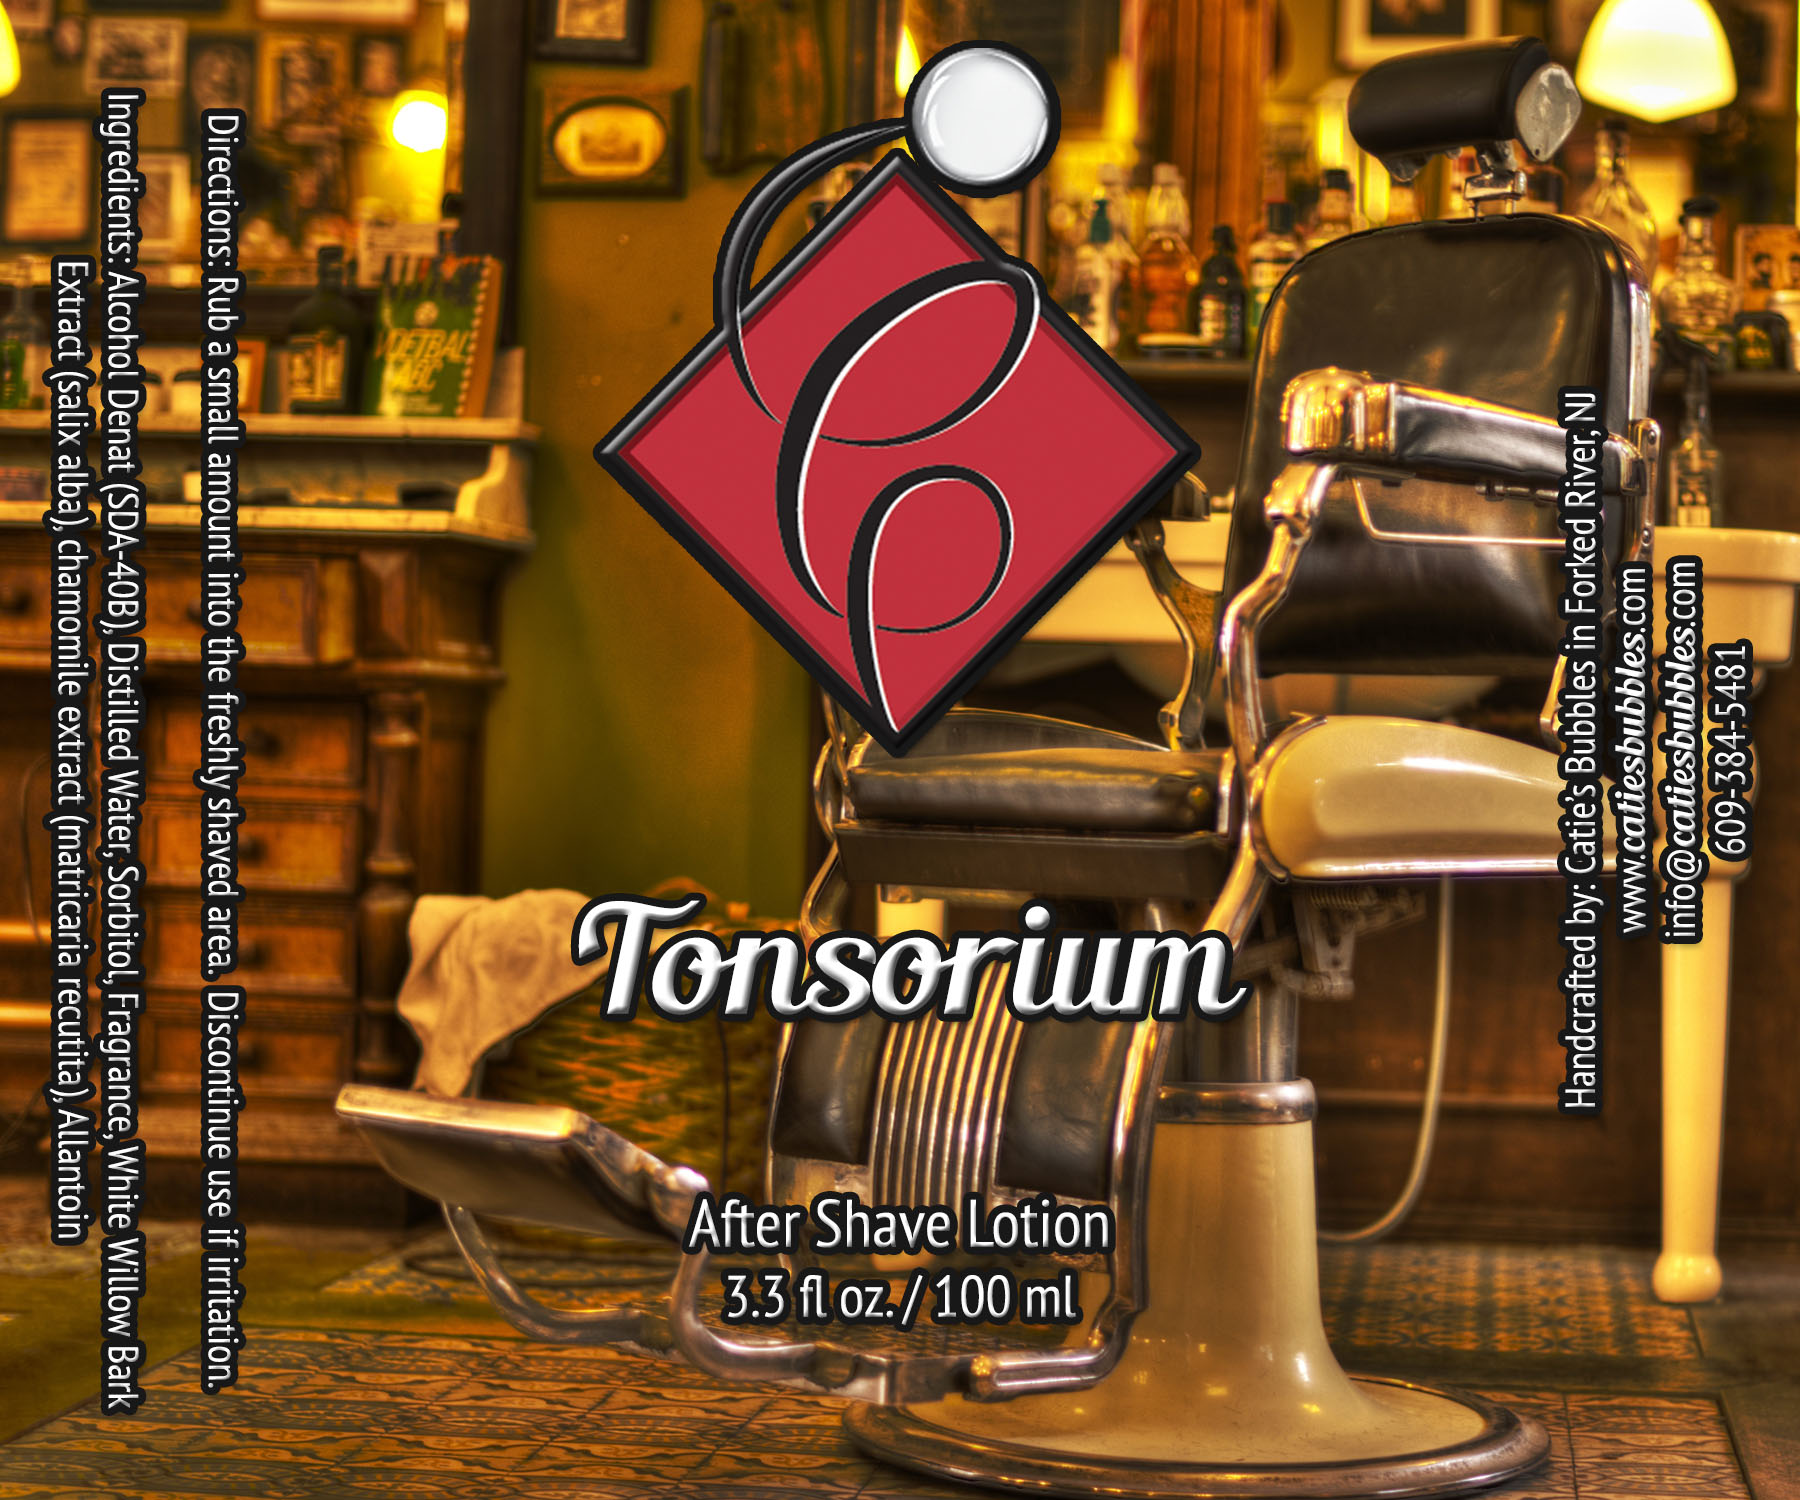 Tonsorium After Shave Lotion - Click Image to Close